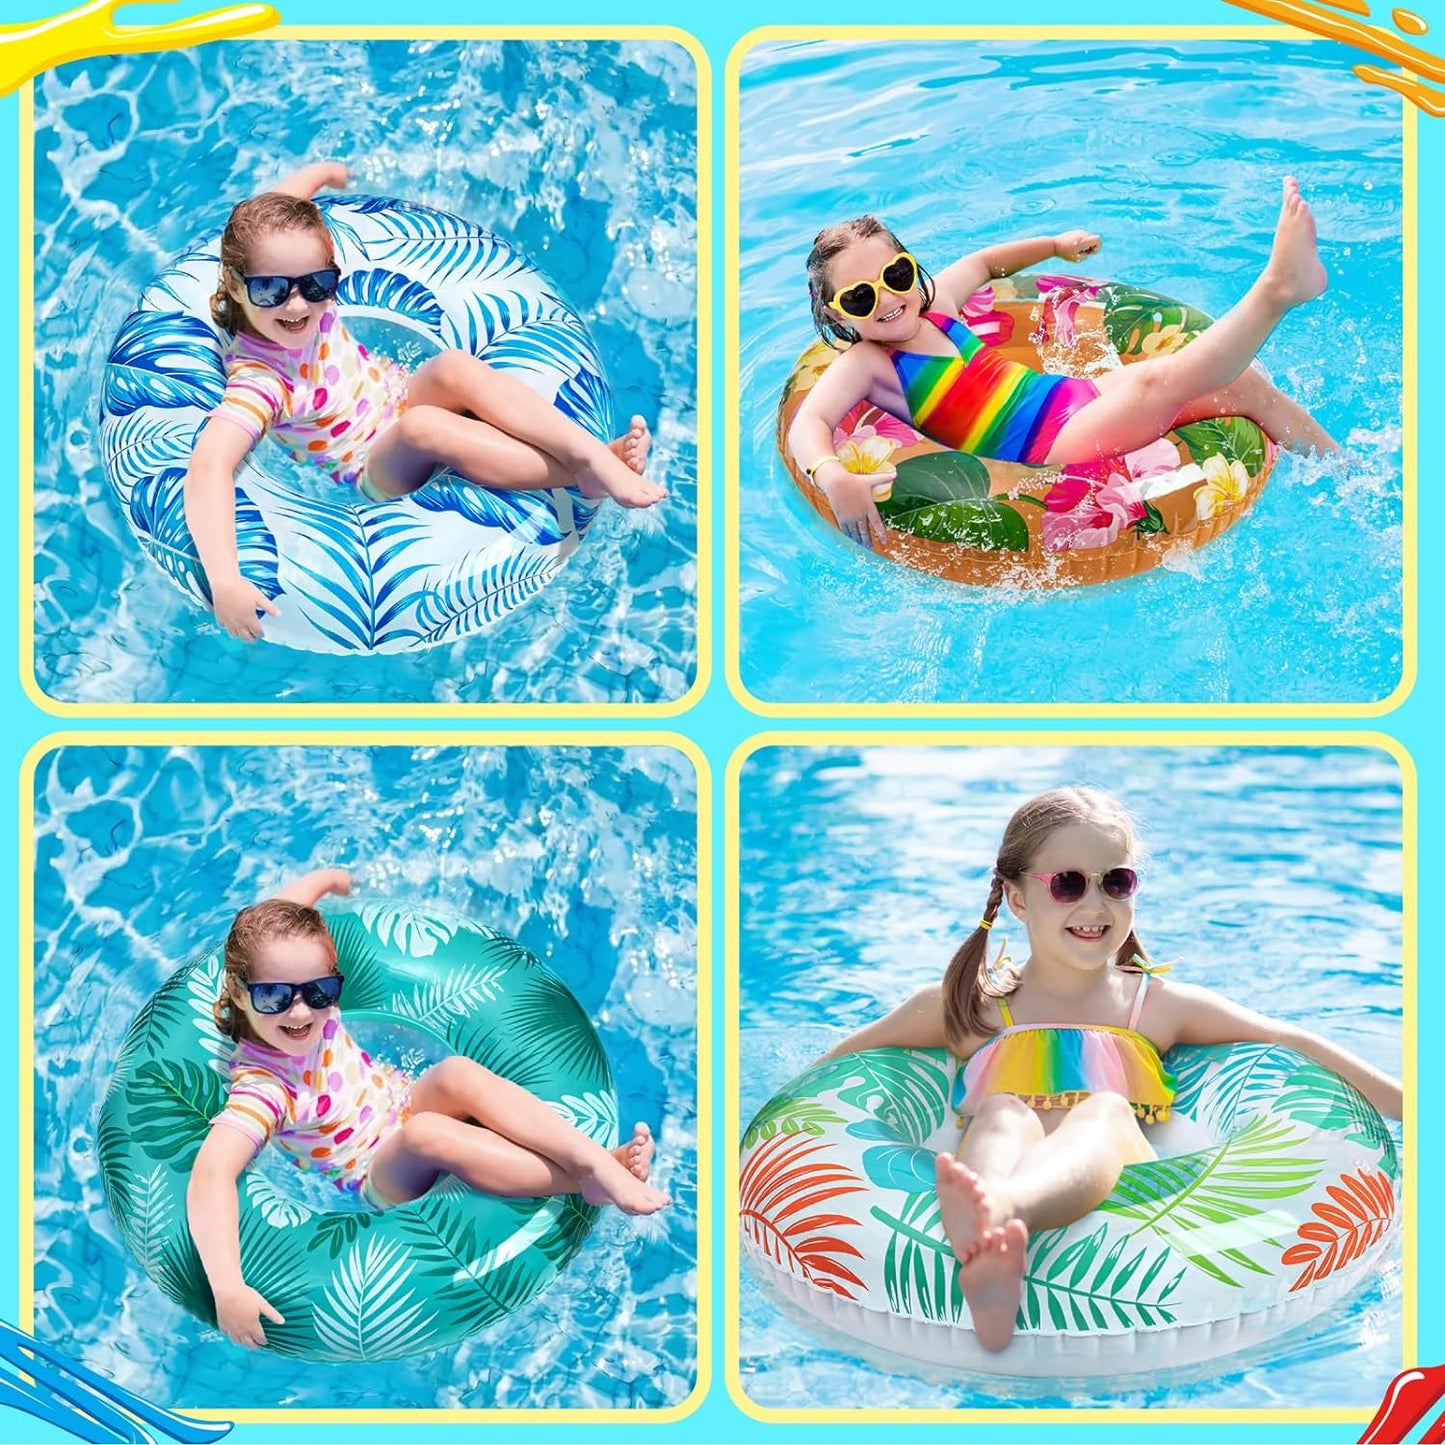 7PCS Luau Pool Floats: Hawaiian Swimming Rings with 13.5" Beach Balls - Inflatable Tubes Floaties Toys for Kids Adults